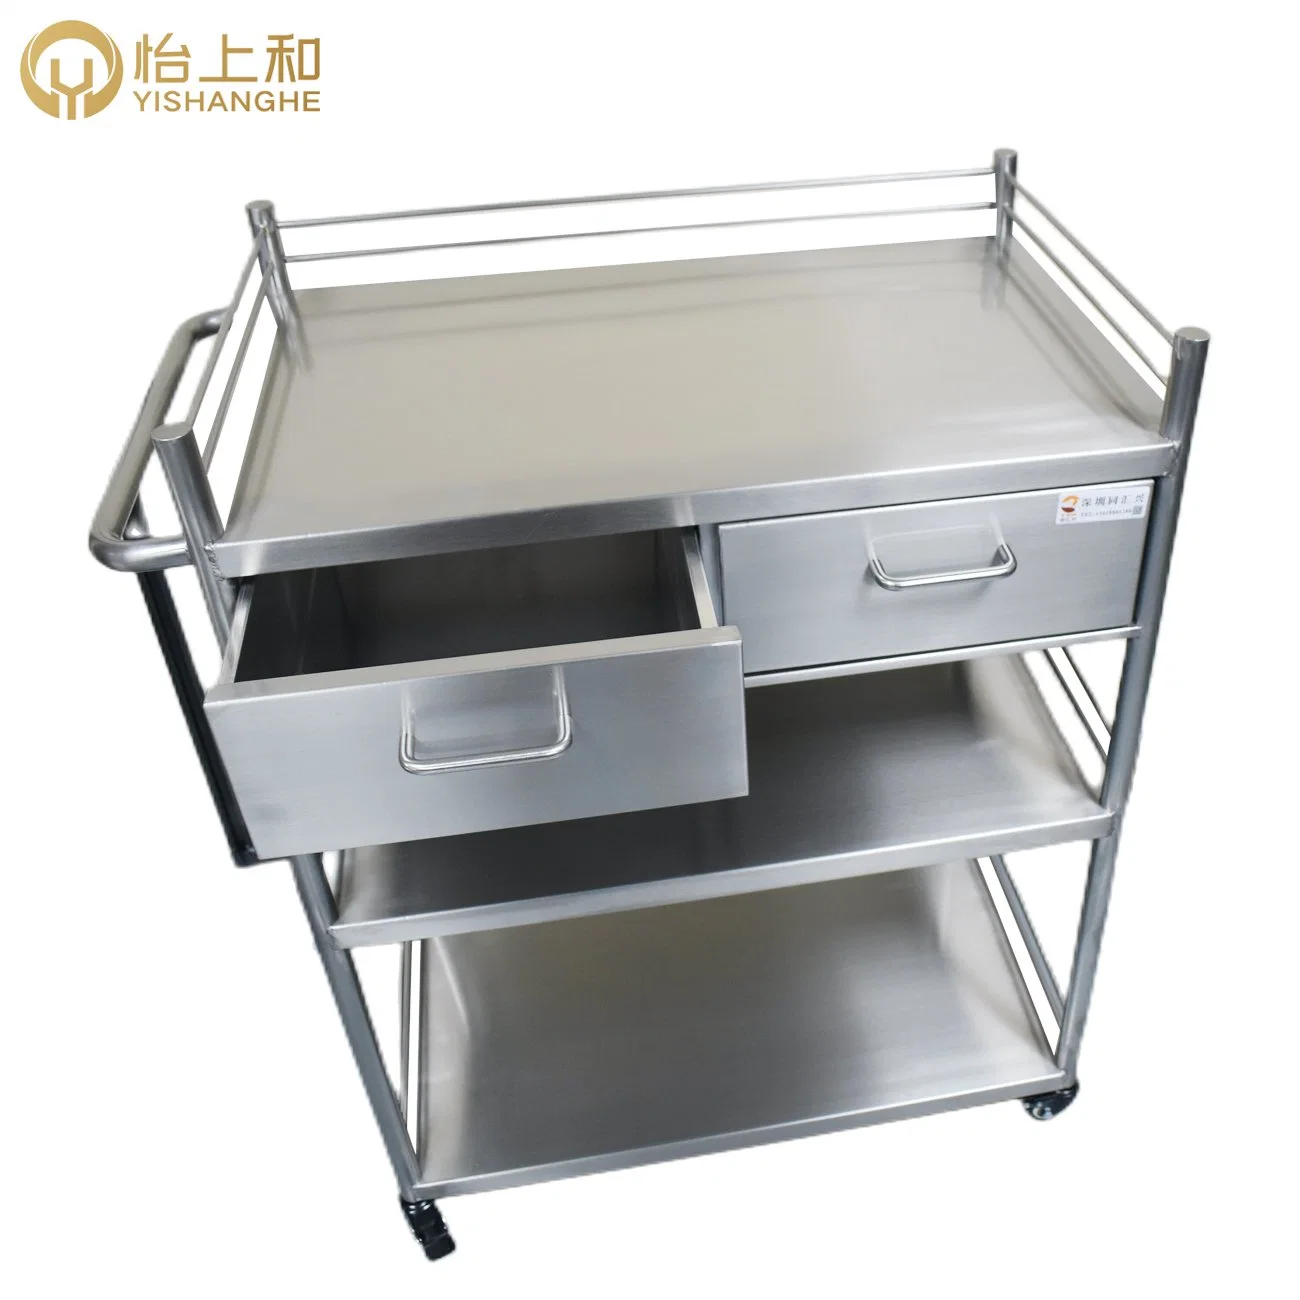 Hospital Cart Metal Stainless Steel Medical Cabinet Trolley Auxiliary Desk